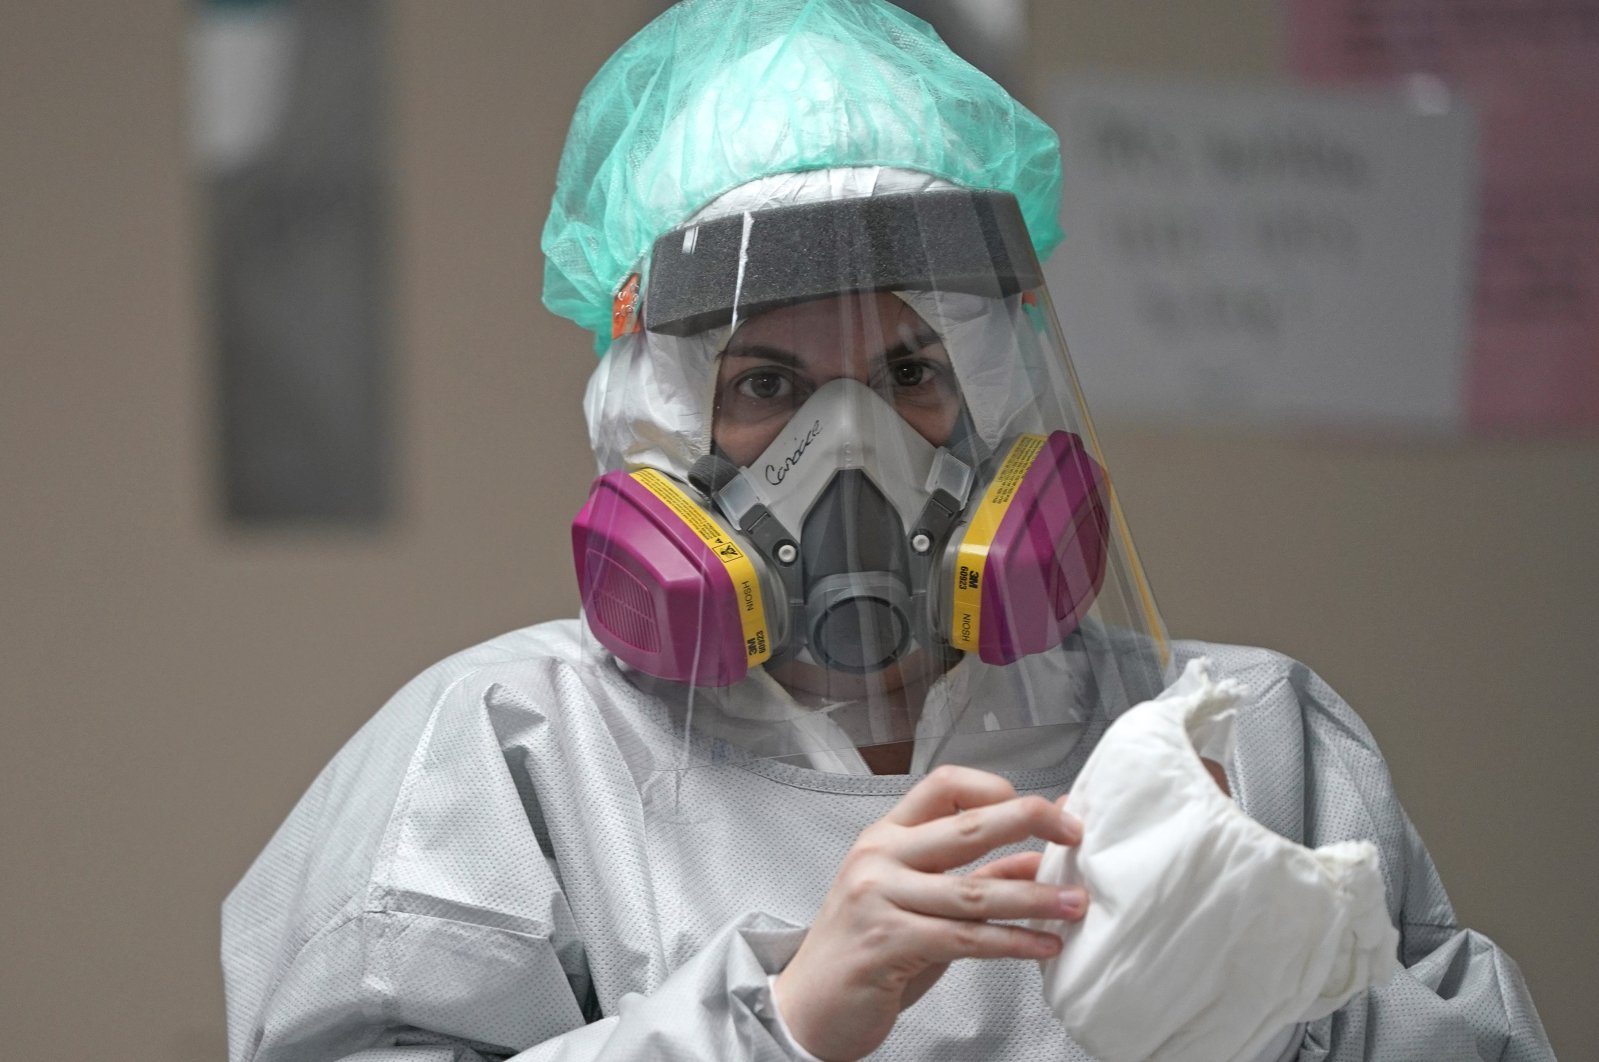 Registered nurse Candace Trammeor grabs shoe coverings inside the Coronavirus Unit at United Memorial Medical Center, Houston, Texas, U.S., July 6, 2020. (AP Photo)